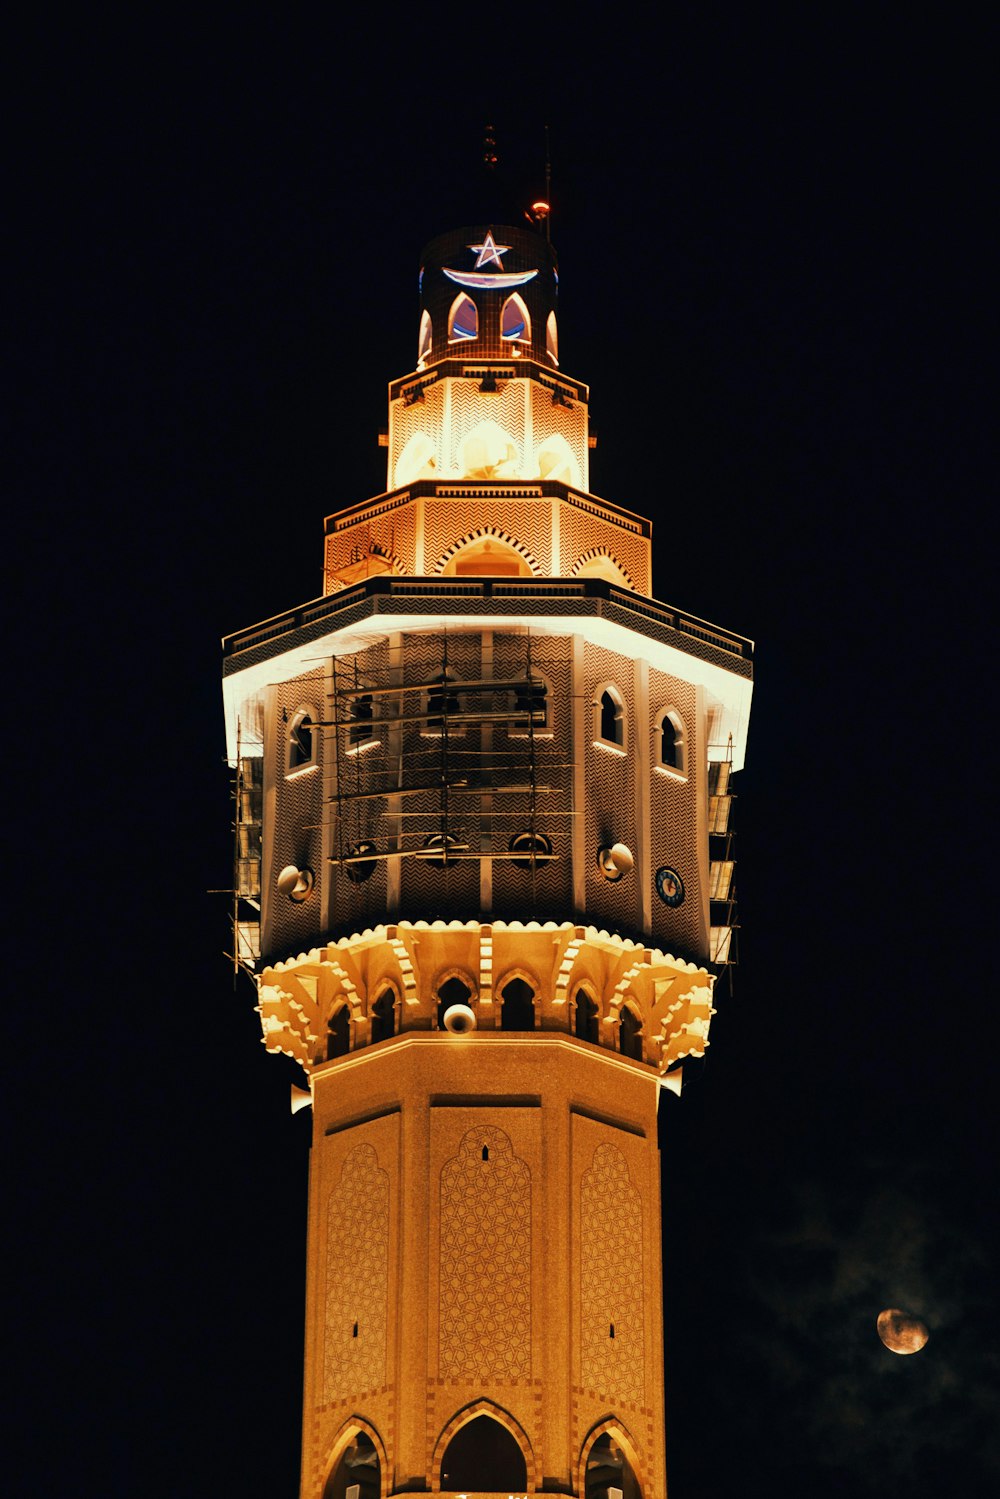 a tall tower with a clock